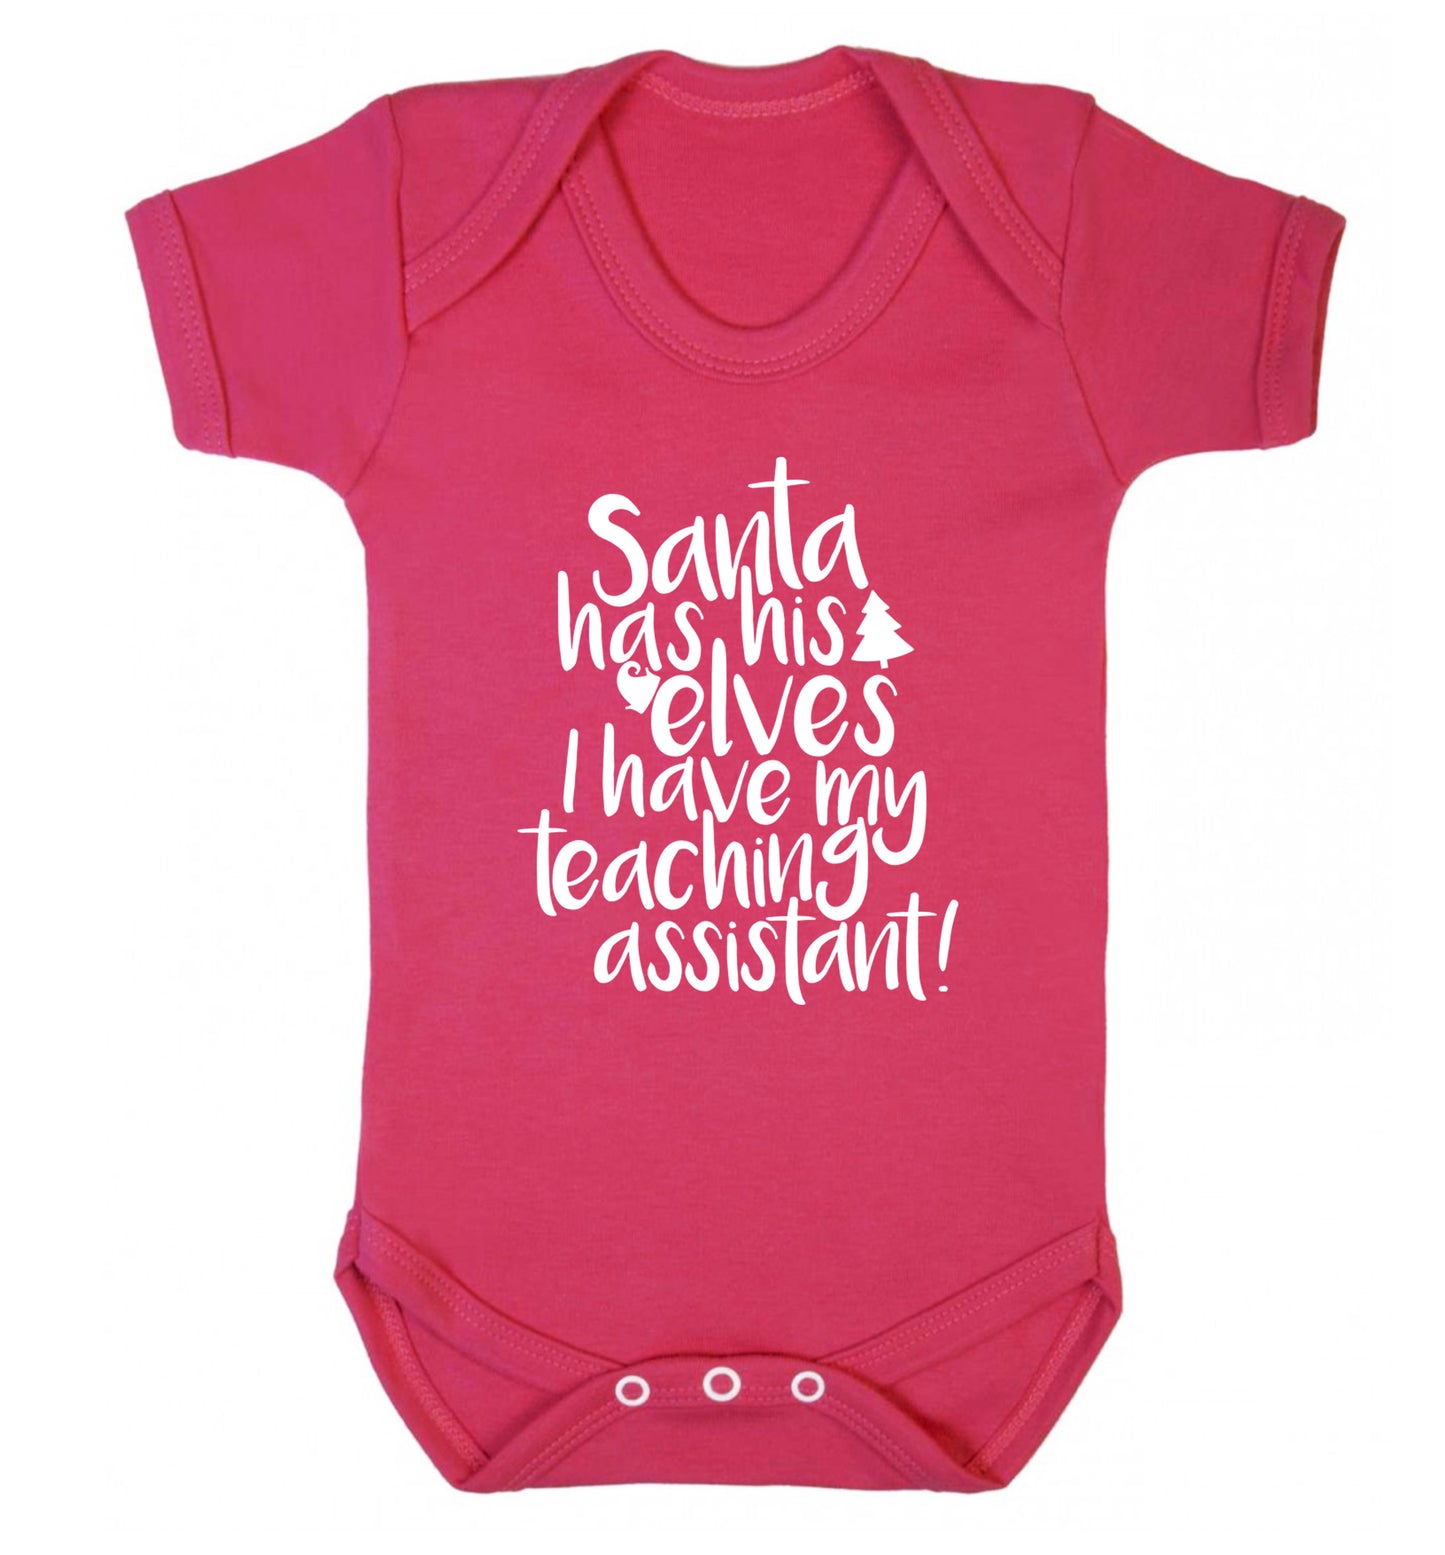 Santa has his elves I have my teaching assistant Baby Vest dark pink 18-24 months